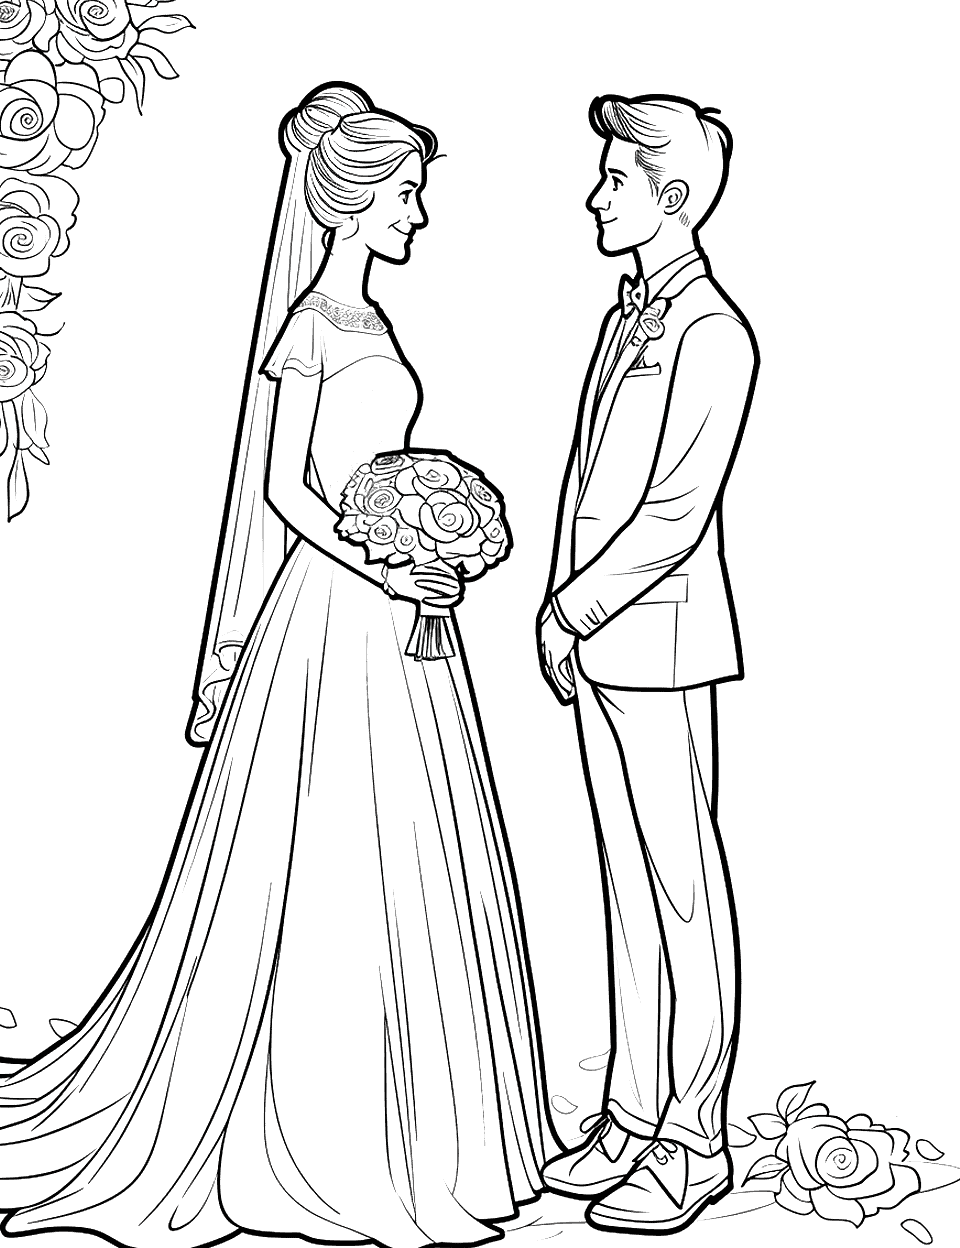 Bride and Groom's First Look Wedding Coloring Page - A bride and groom seeing each other for the first time on their wedding day.